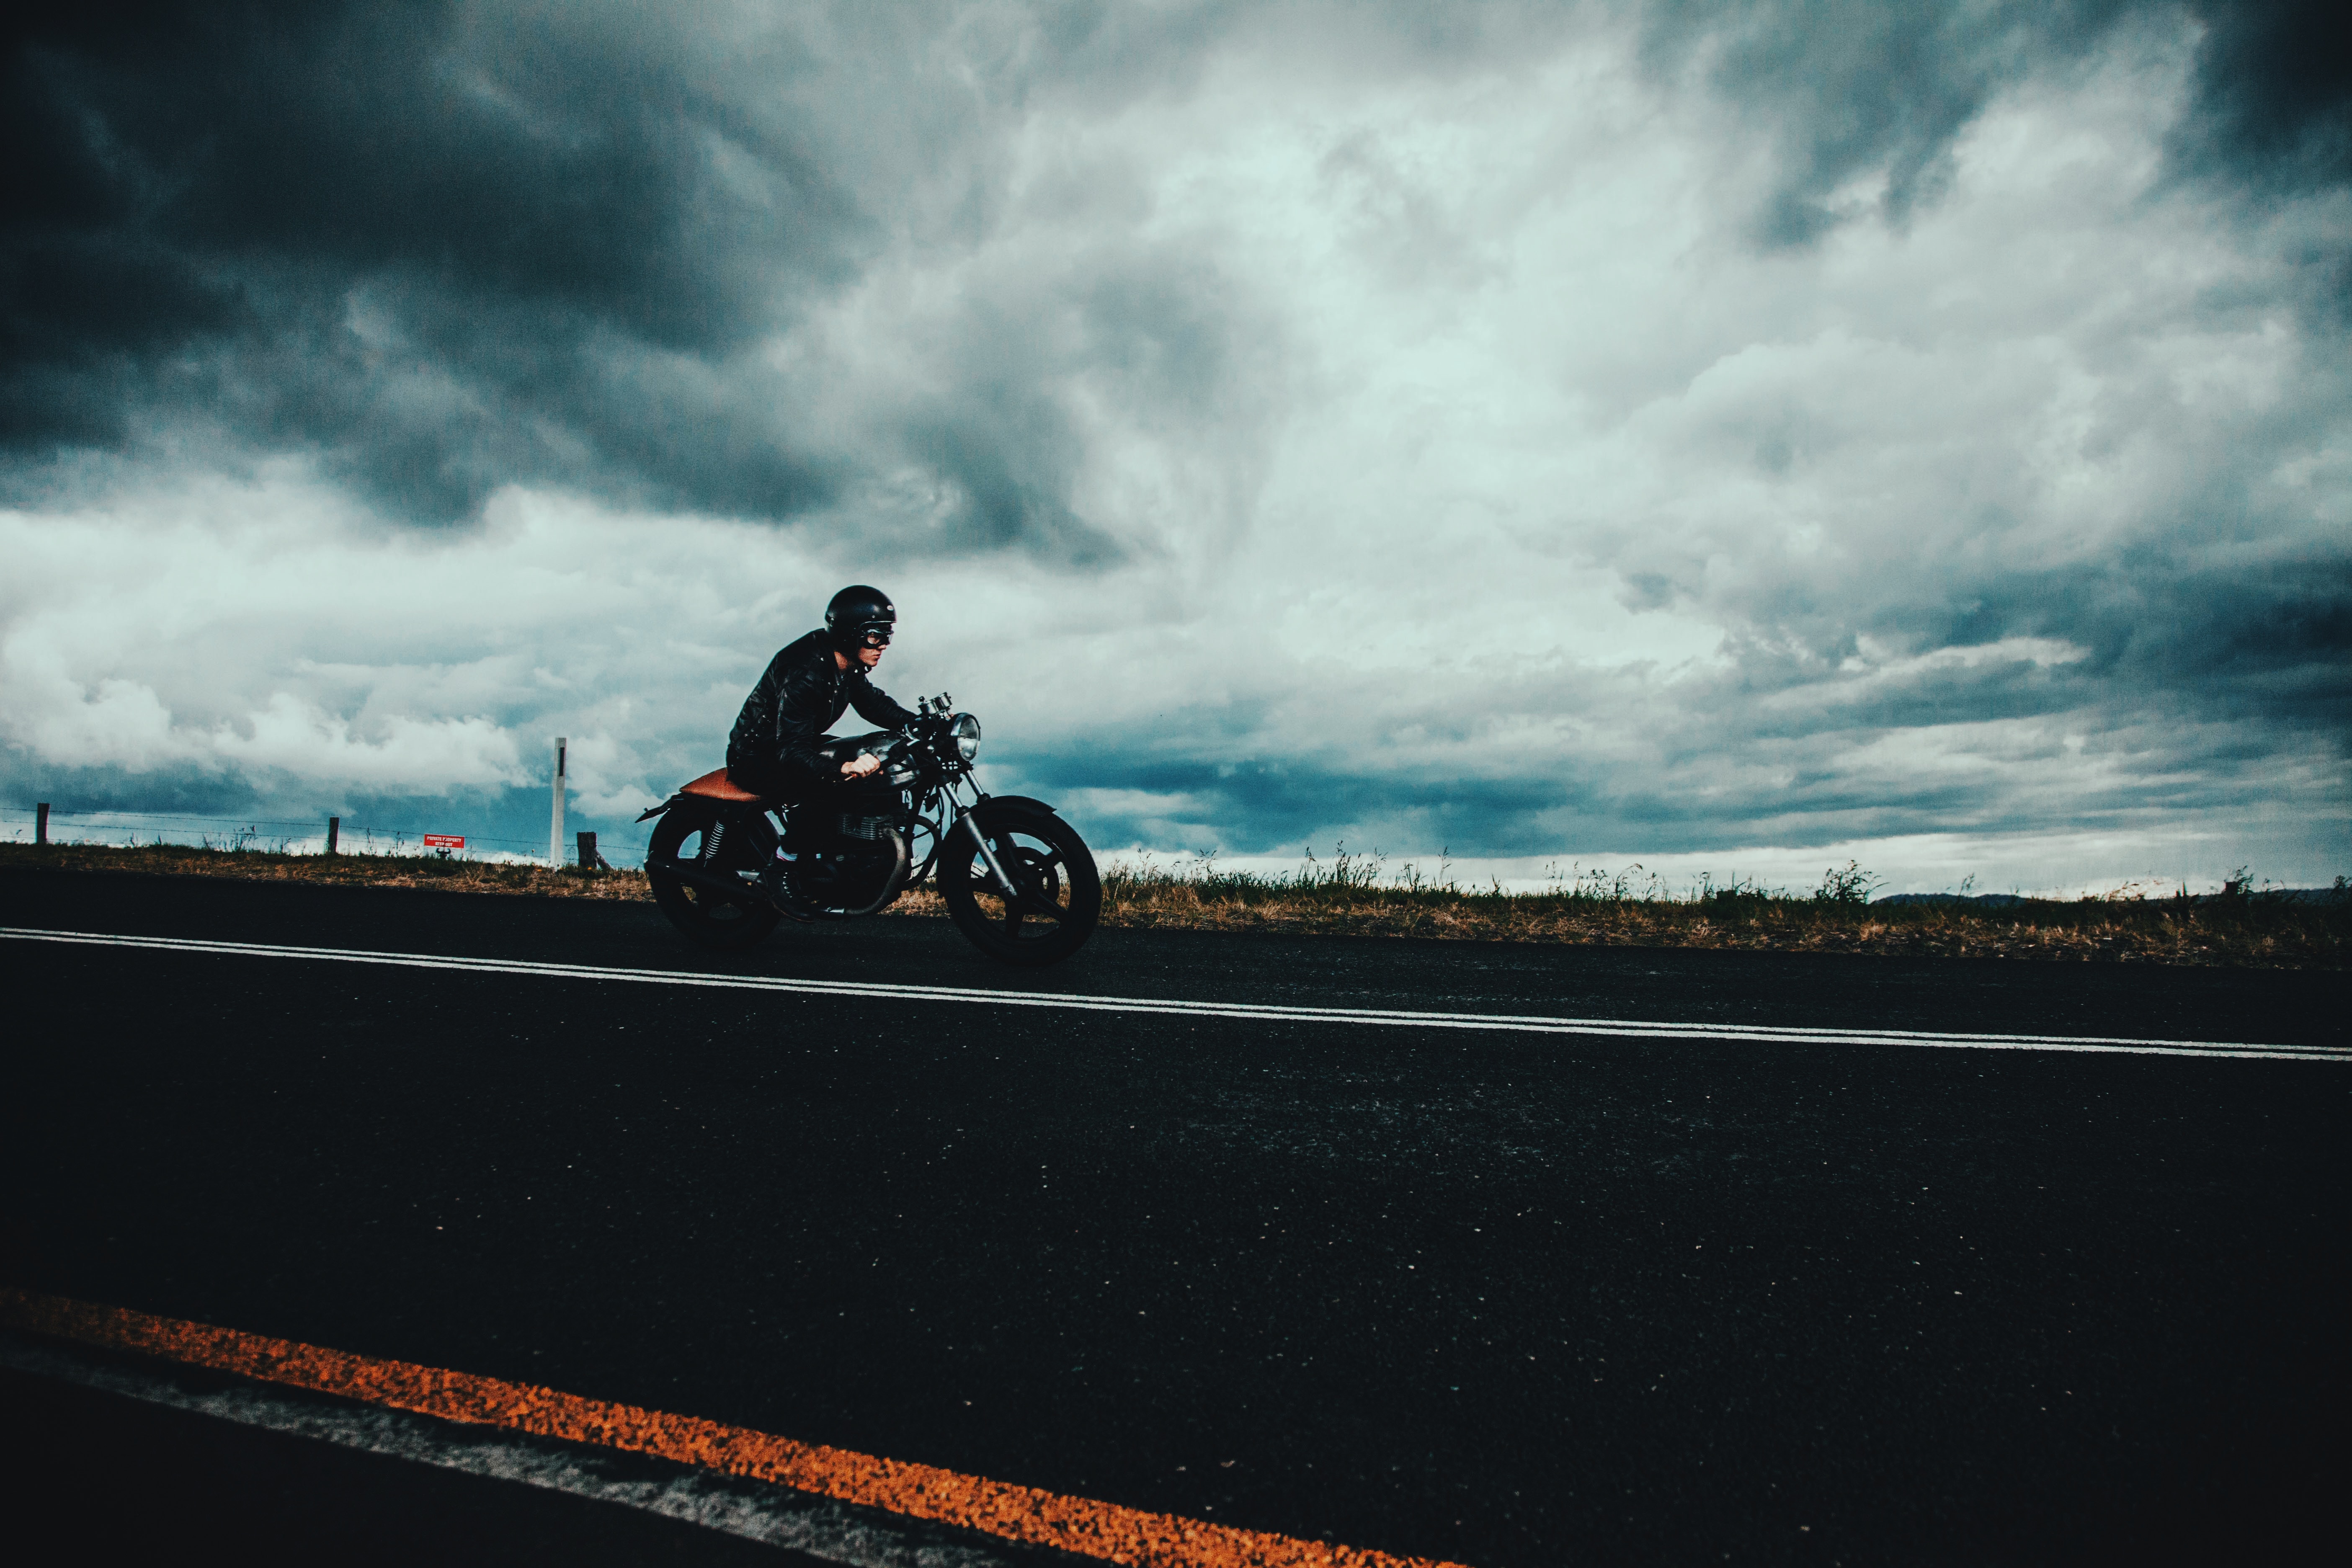 Wallpaper for mobile devices motorcyclist, asphalt, mainly cloudy, markup